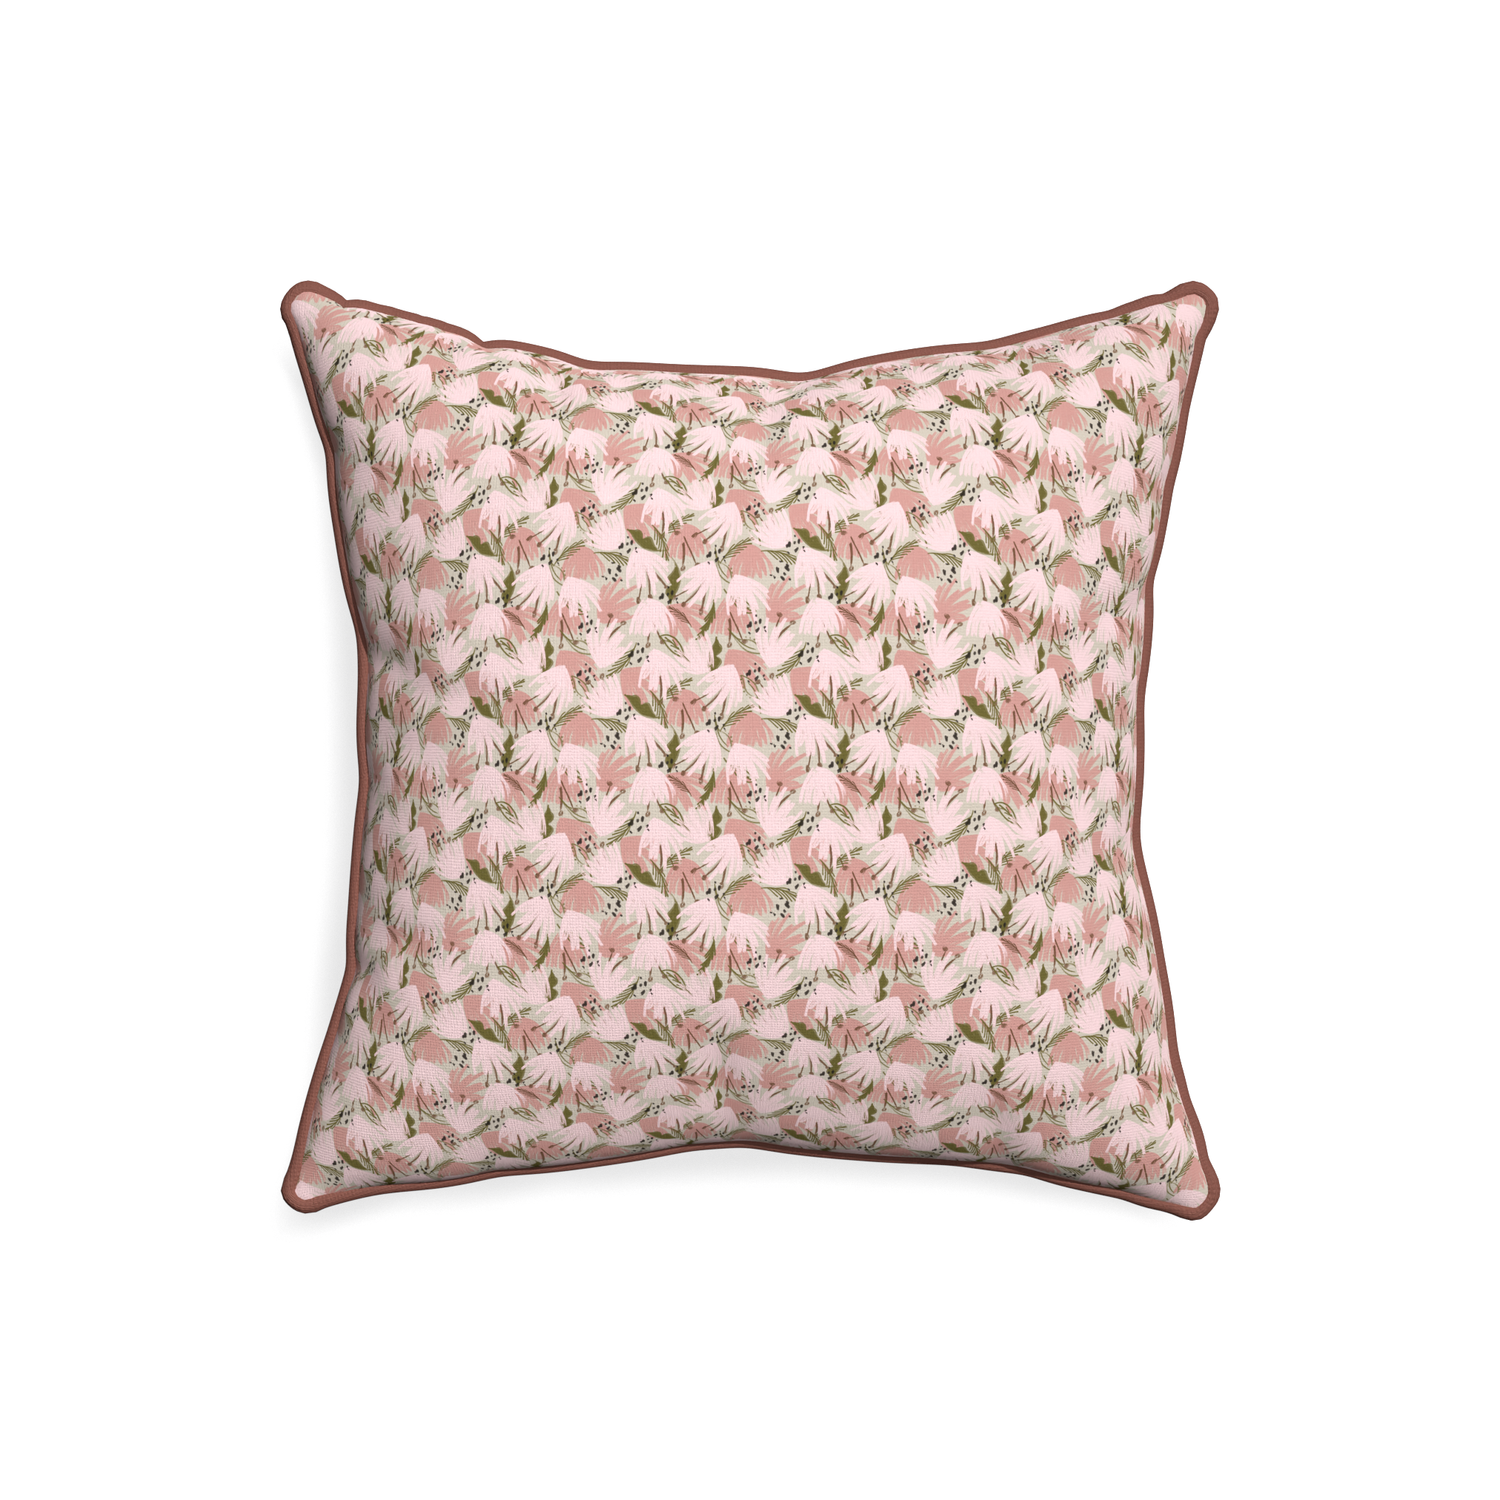 20-square eden pink custom pink floralpillow with w piping on white background